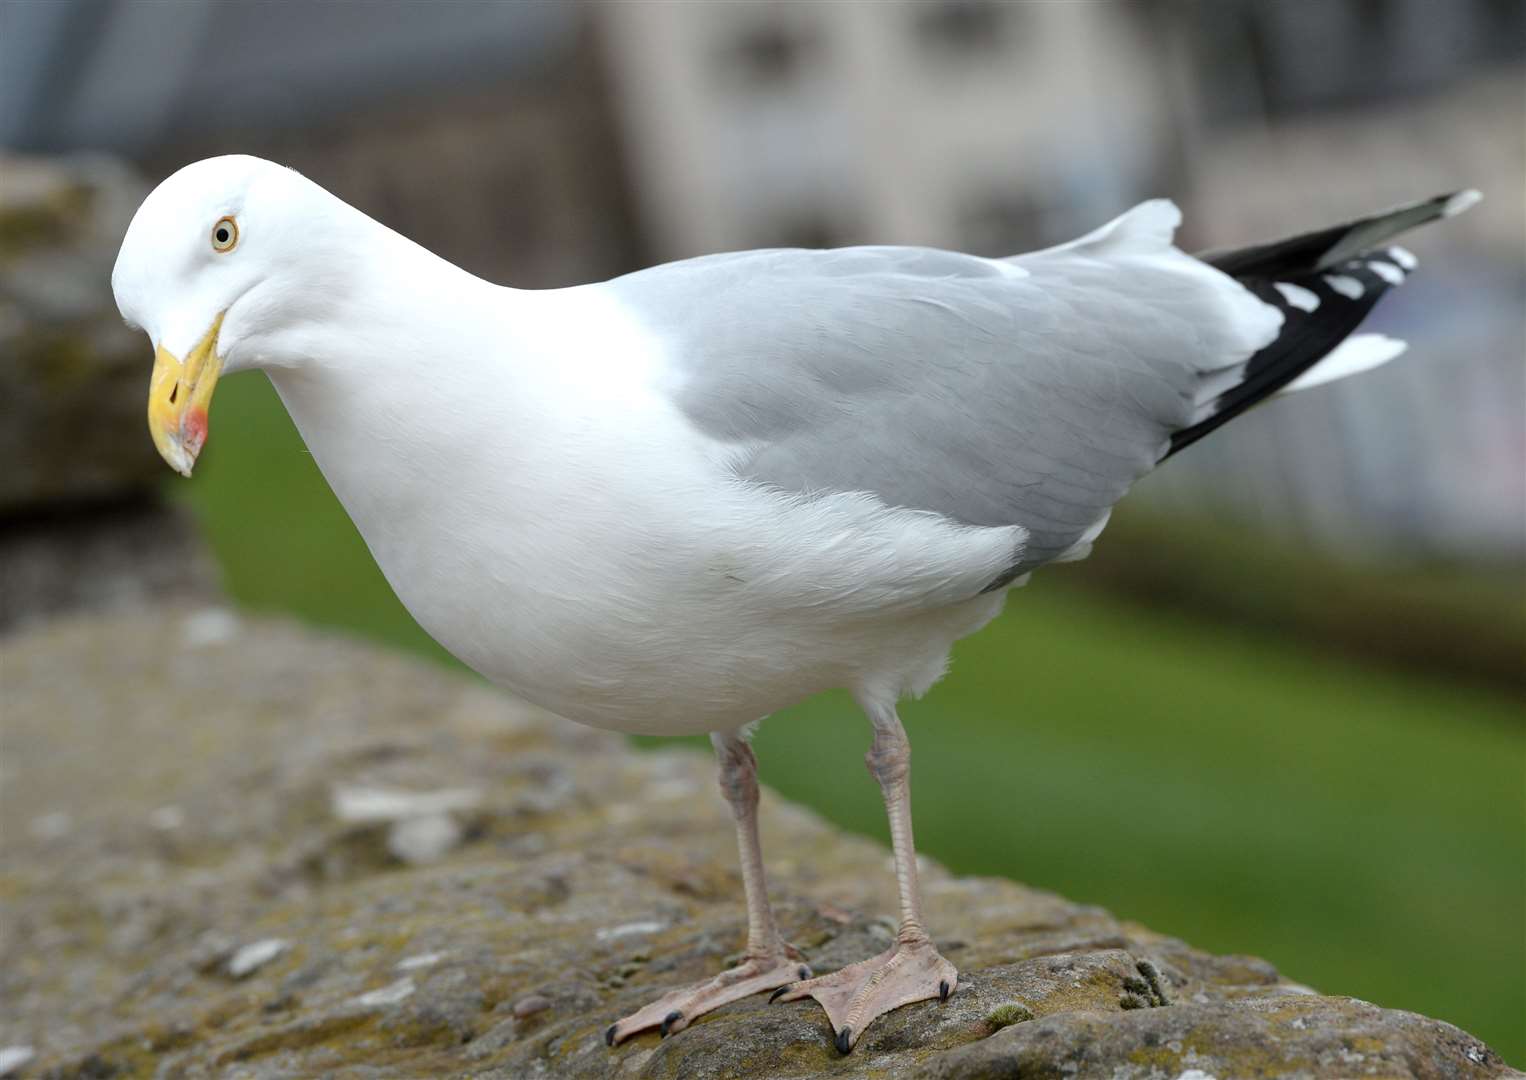 A herring gull was struck with the stuck before being 'put out of its misery'.